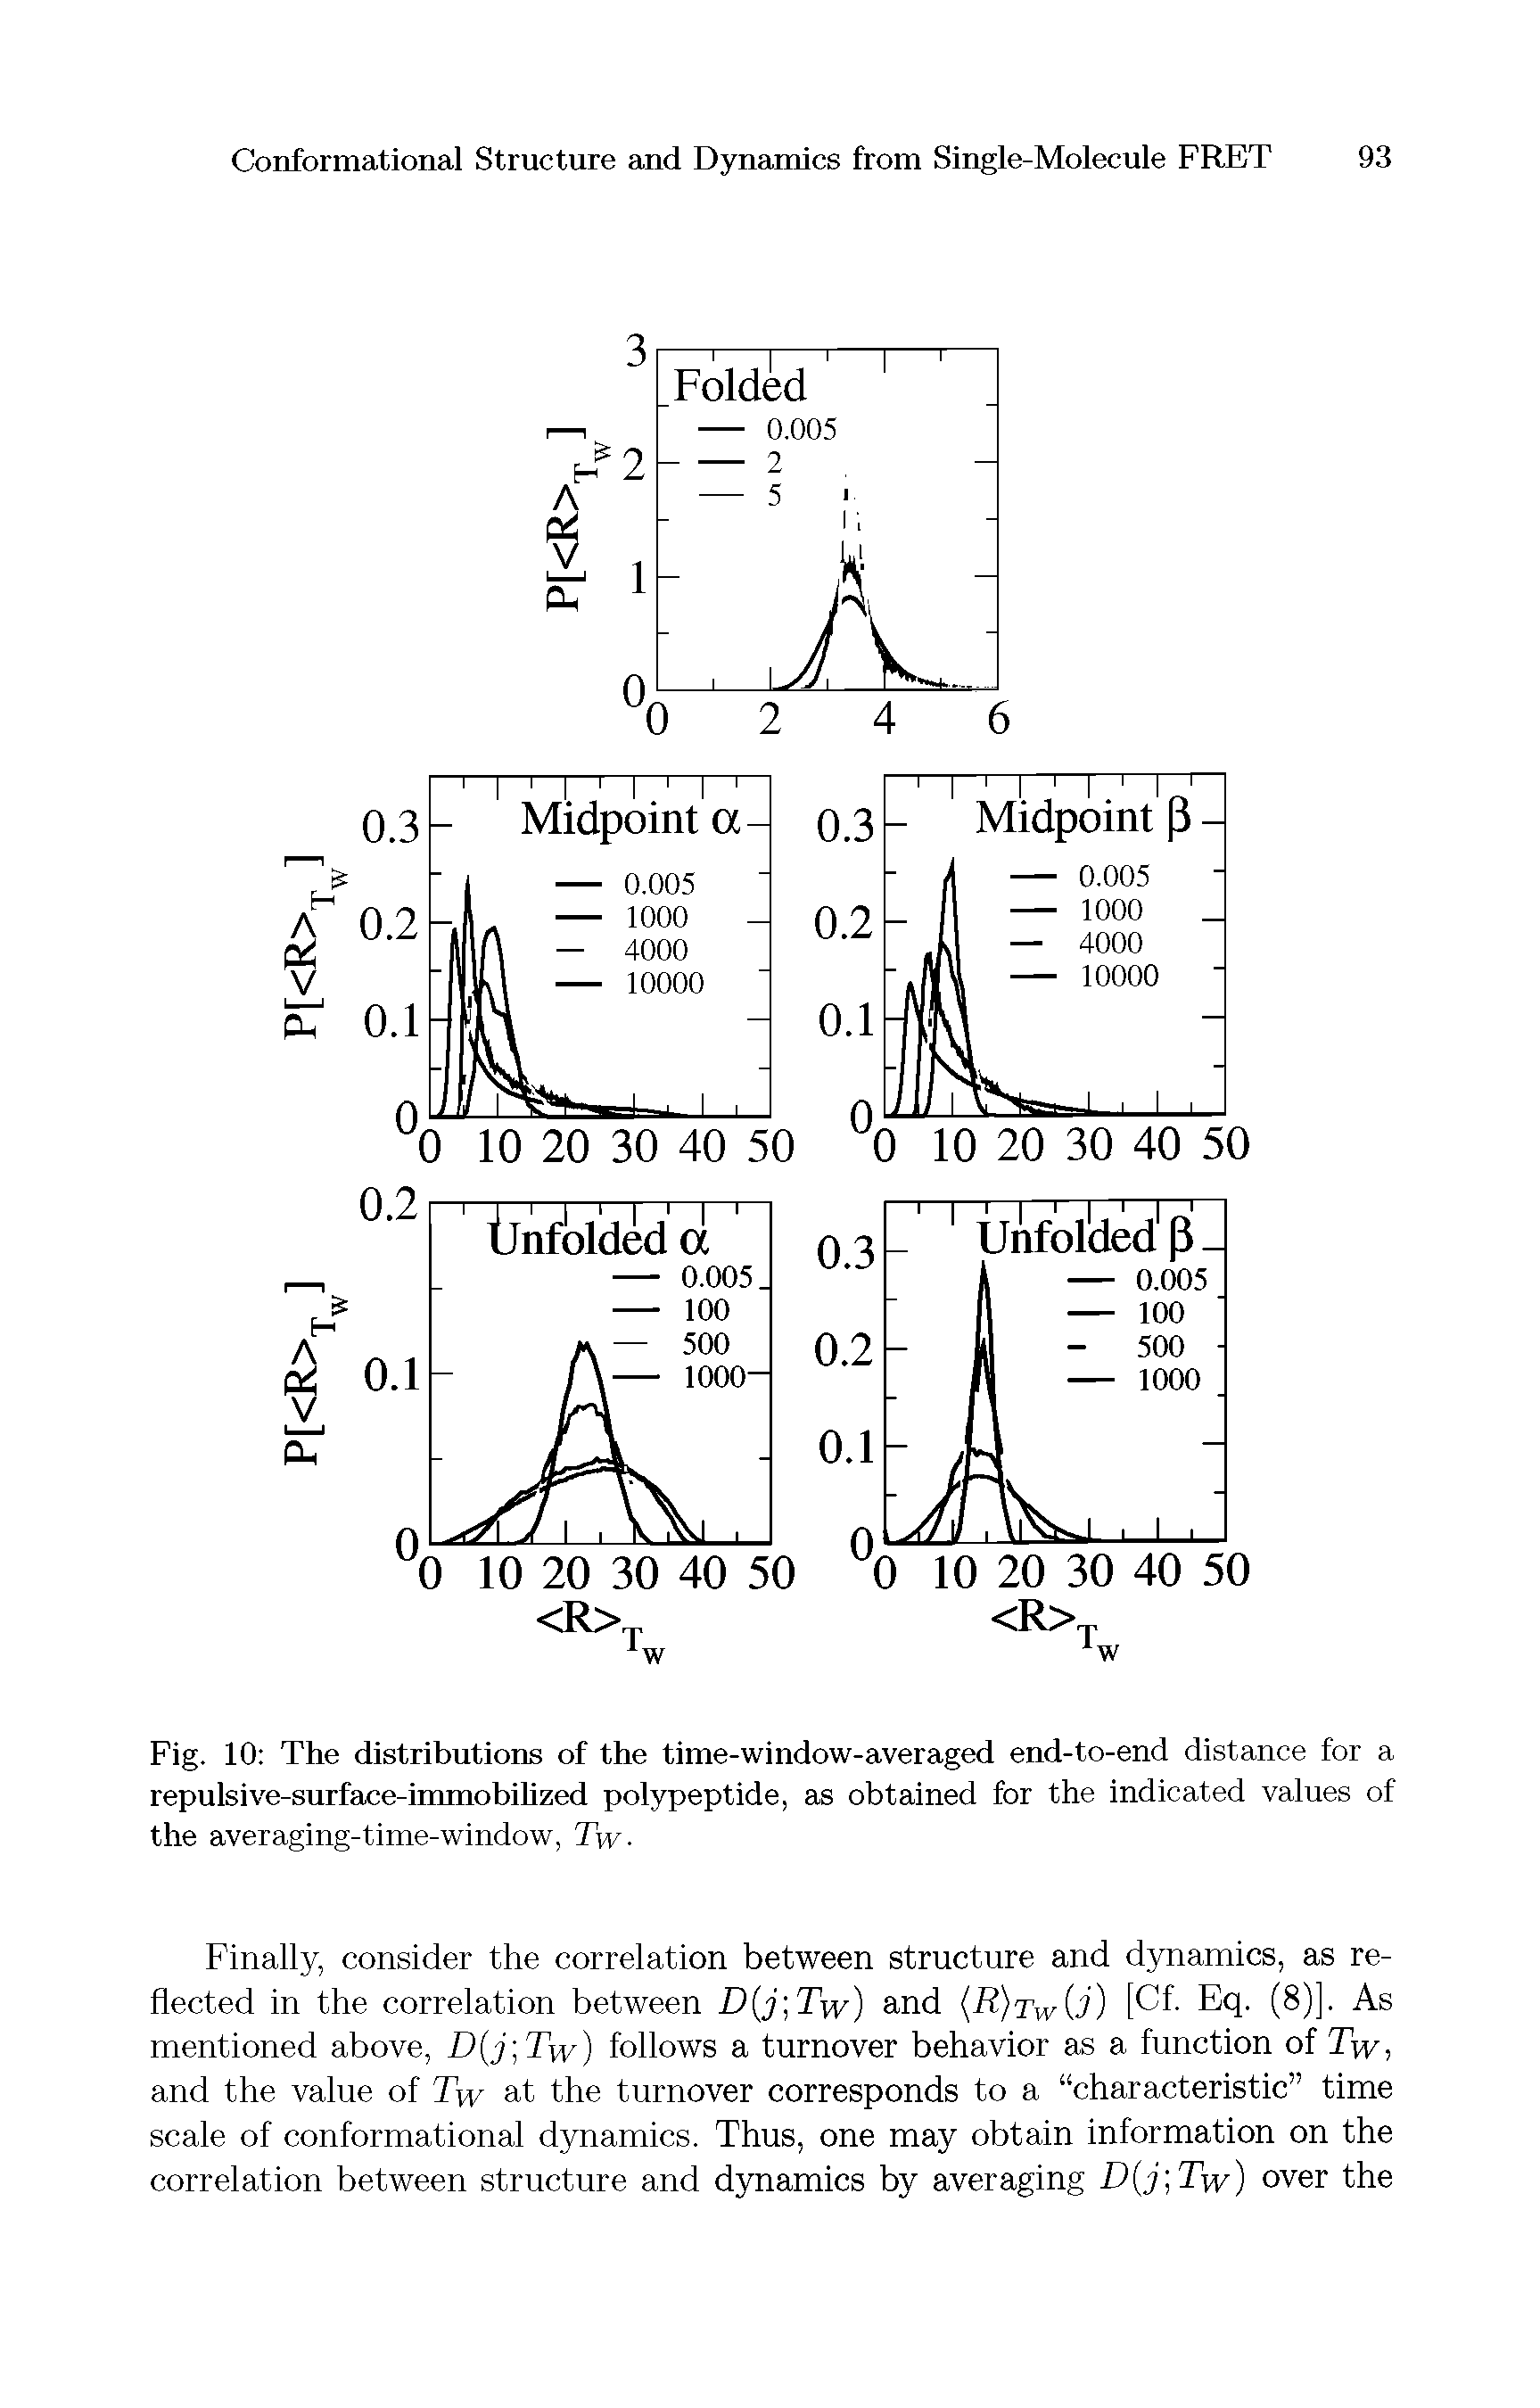 Fig. 10 The distributions of the time-window-averaged end-to-end distance for a repulsive-surface-immobilized polypeptide, as obtained for the indicated values of the averaging-time-window, Tw-...